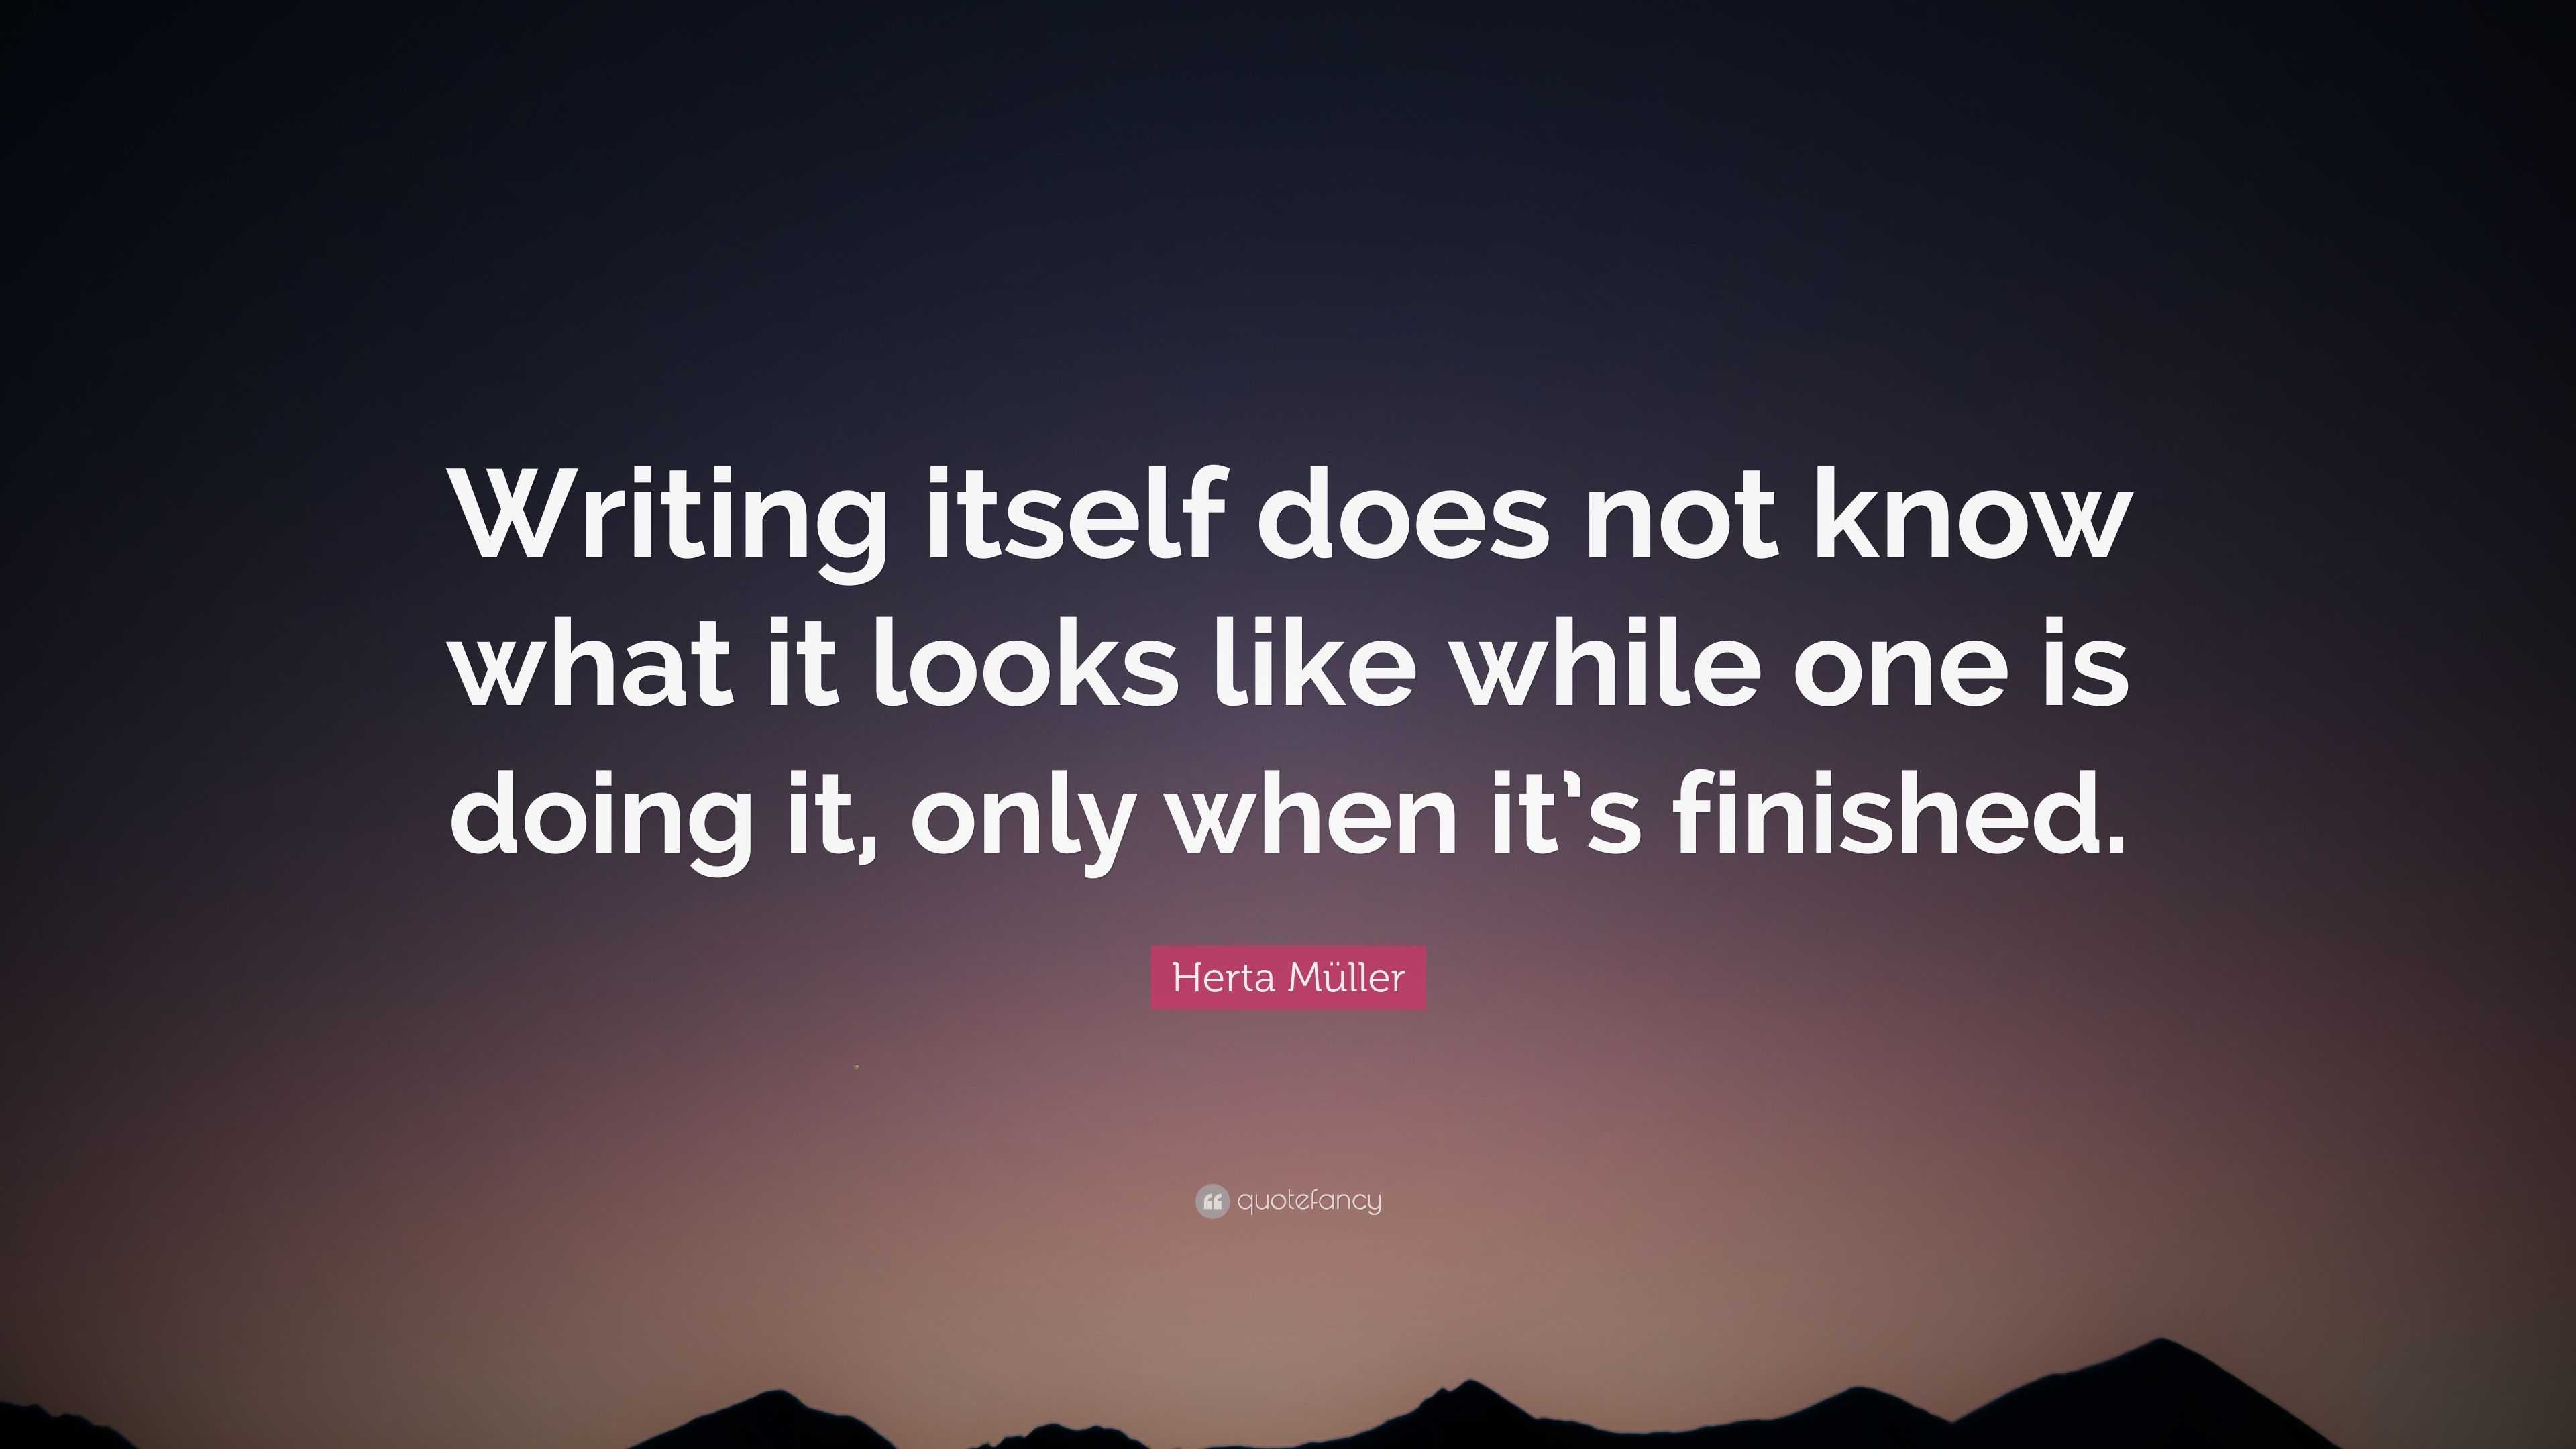 Herta Müller Quote: “Writing itself does not know what it looks like ...